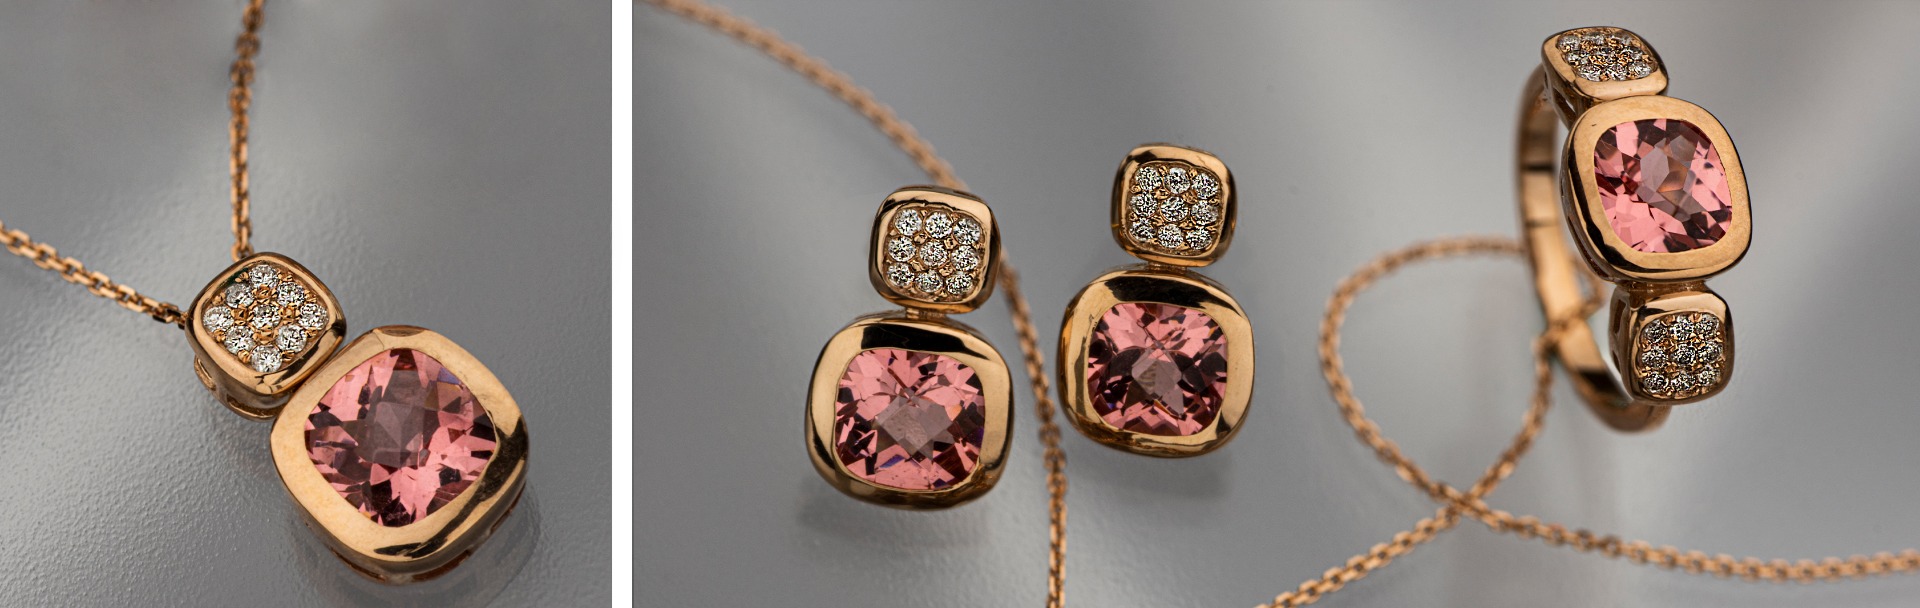 14K Gold Rose Jewelry with Morganite